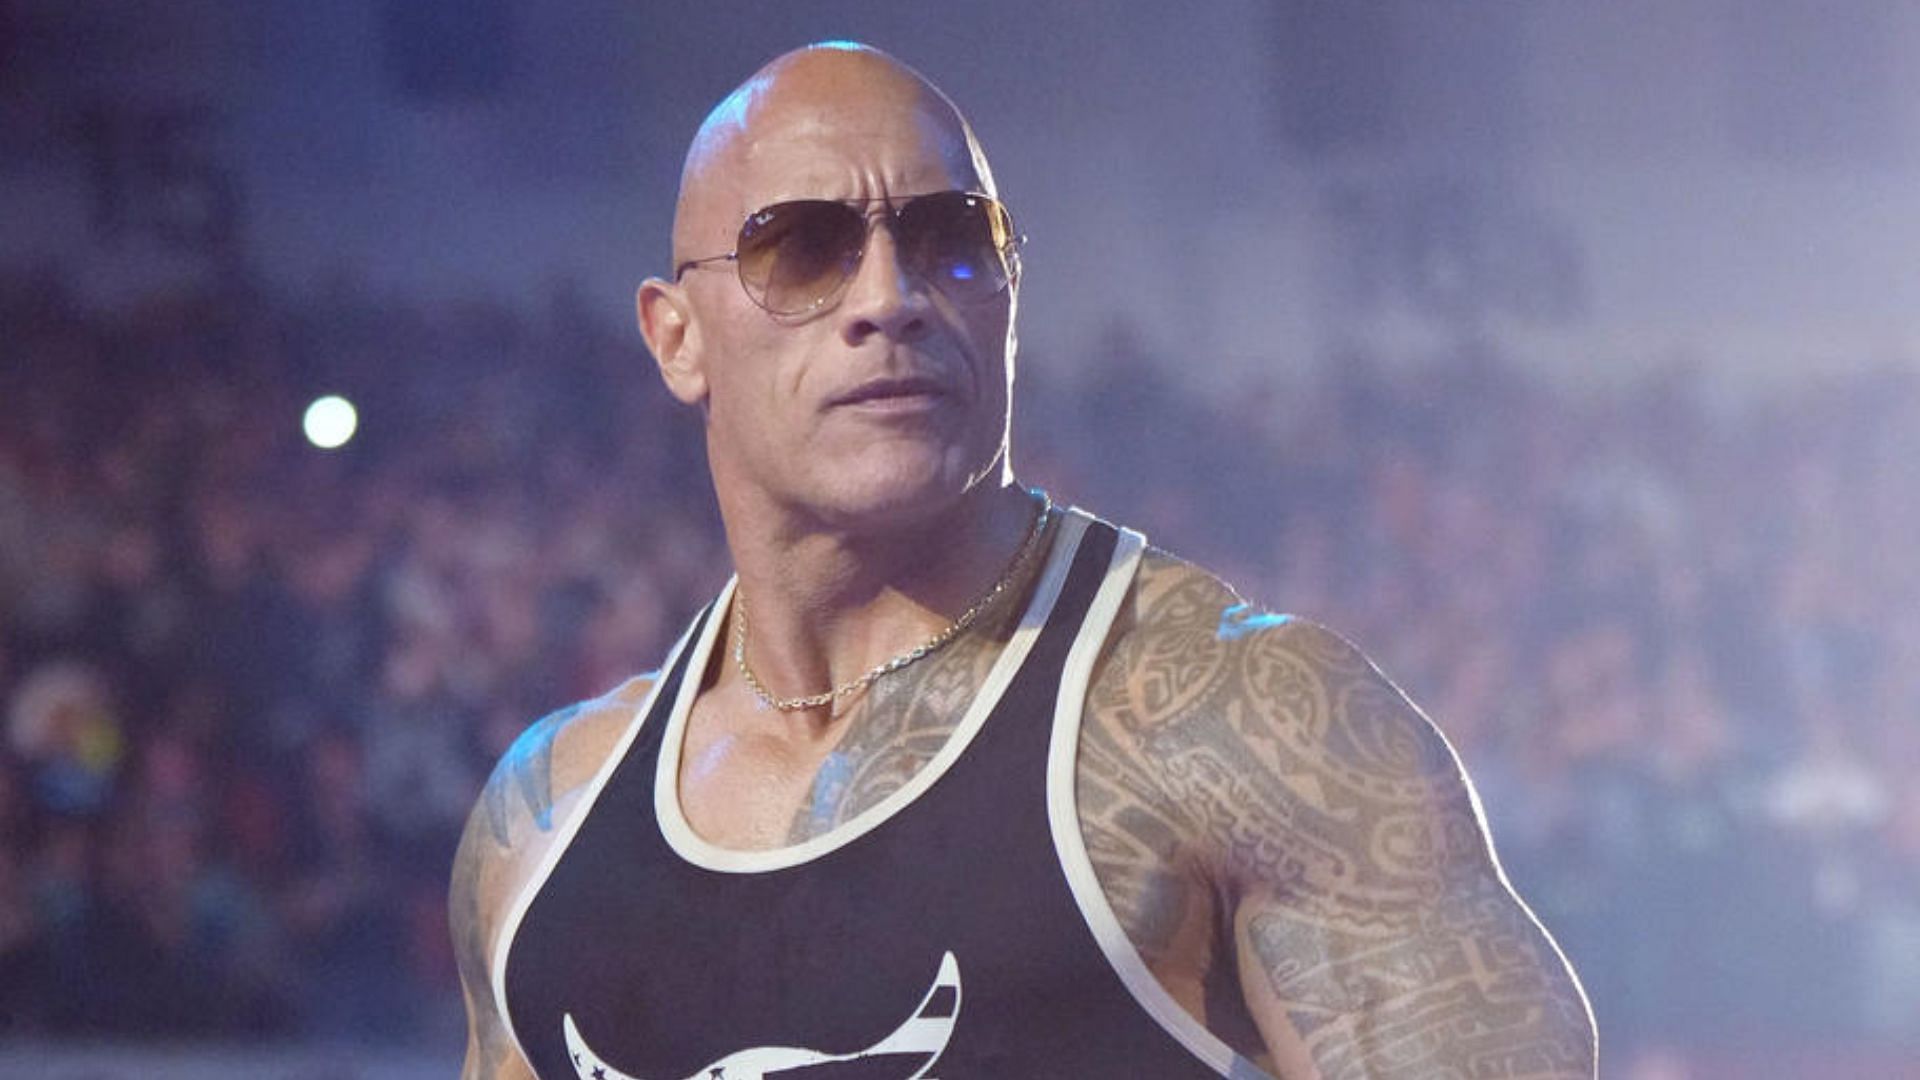 The Rock will return to SmackDown Friday night!